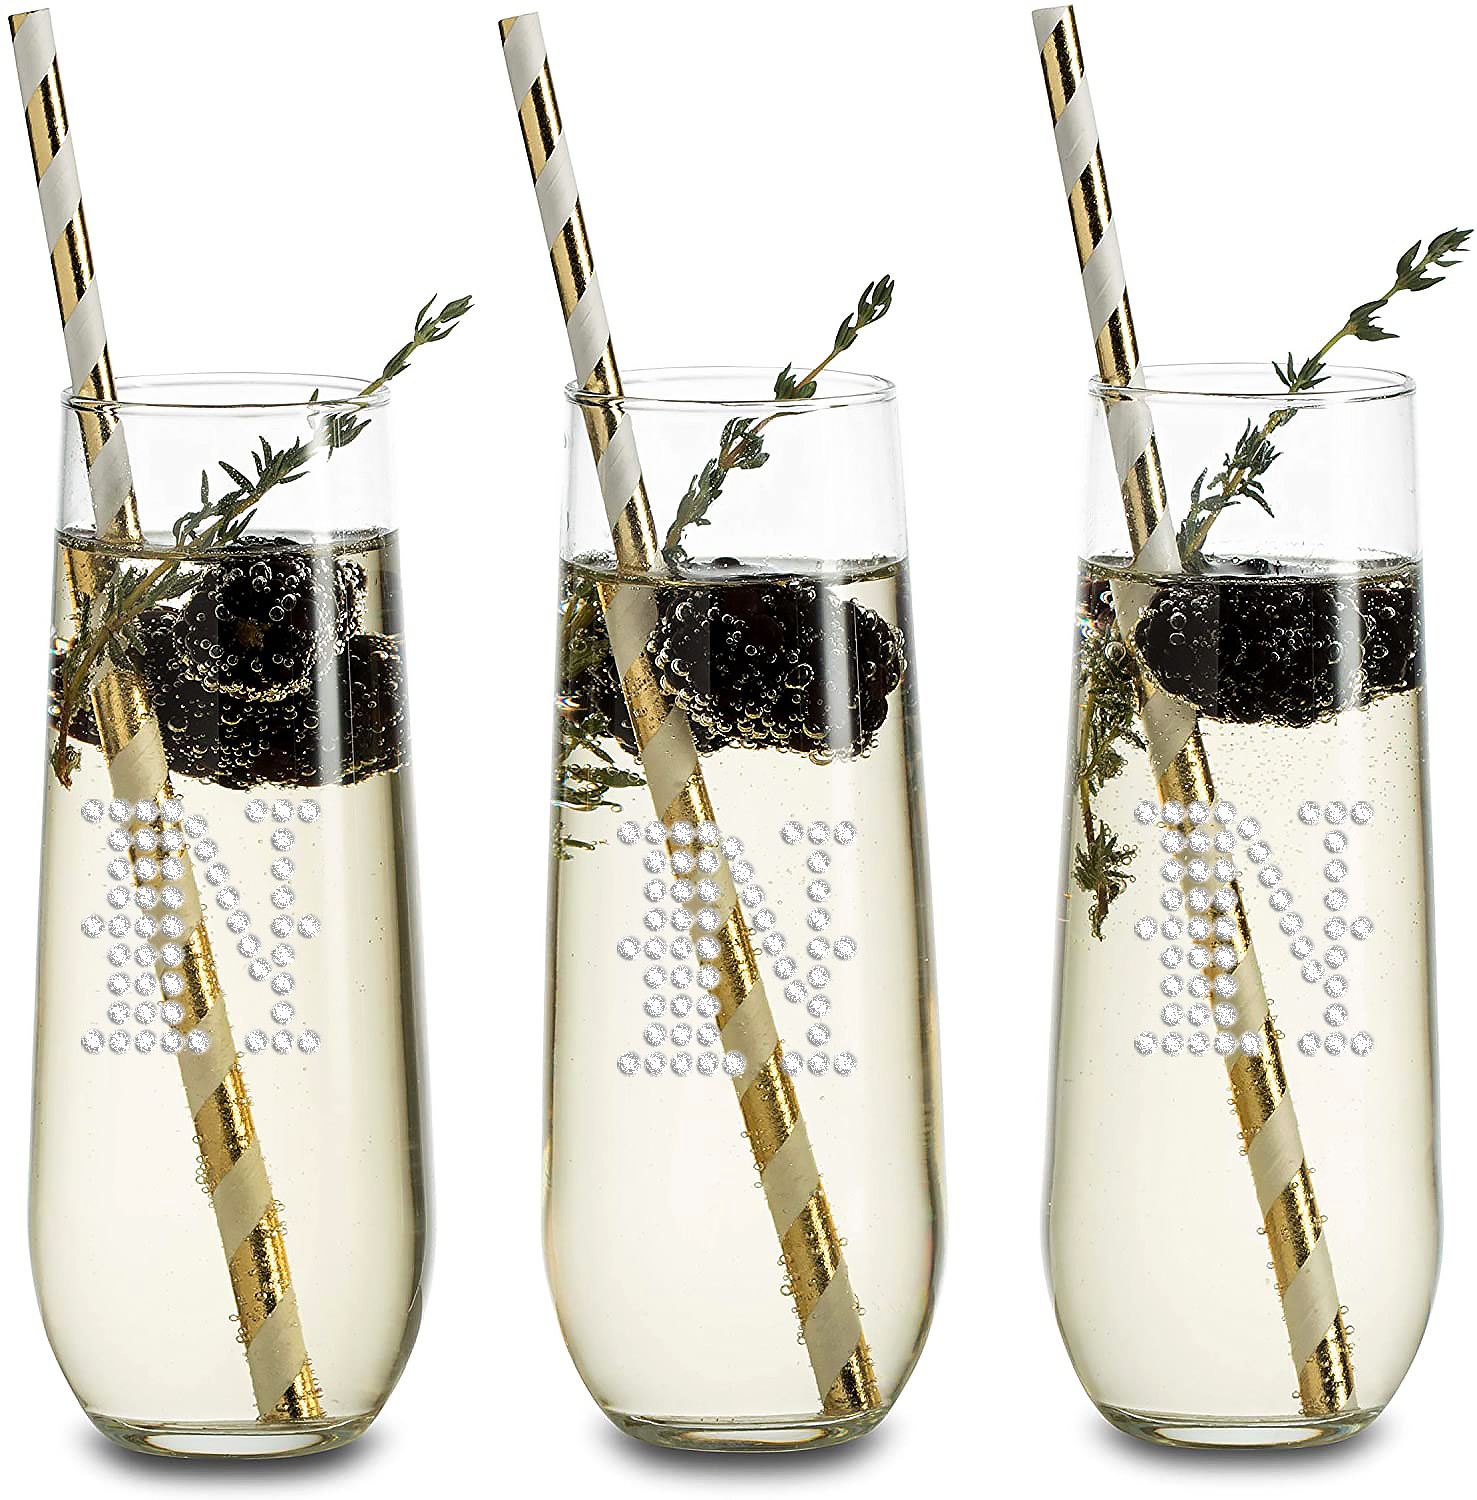 https://www.hansonellis.com/mm5/graphics/00000001/personalized-crystal-rhinestones-personalized-stemless-champagne-glasses.jpg